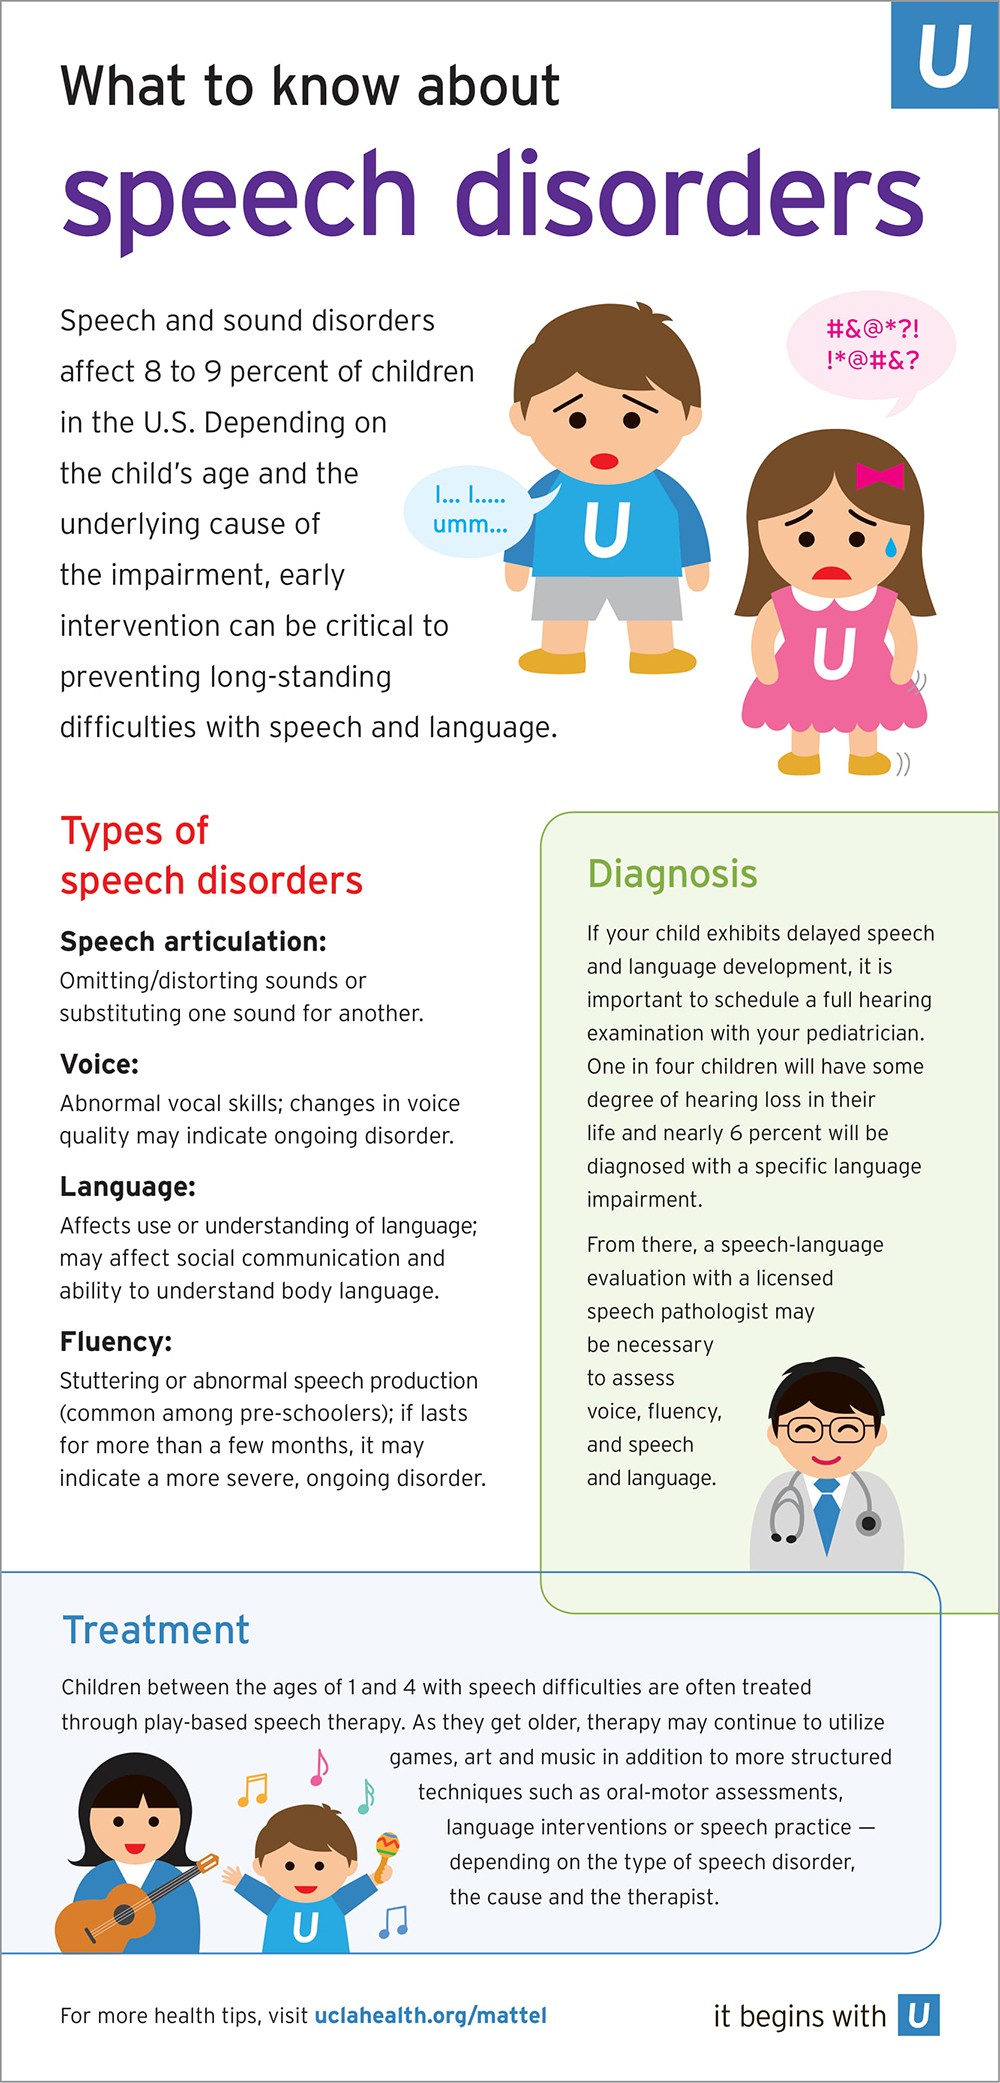 speech and language disorder meaning